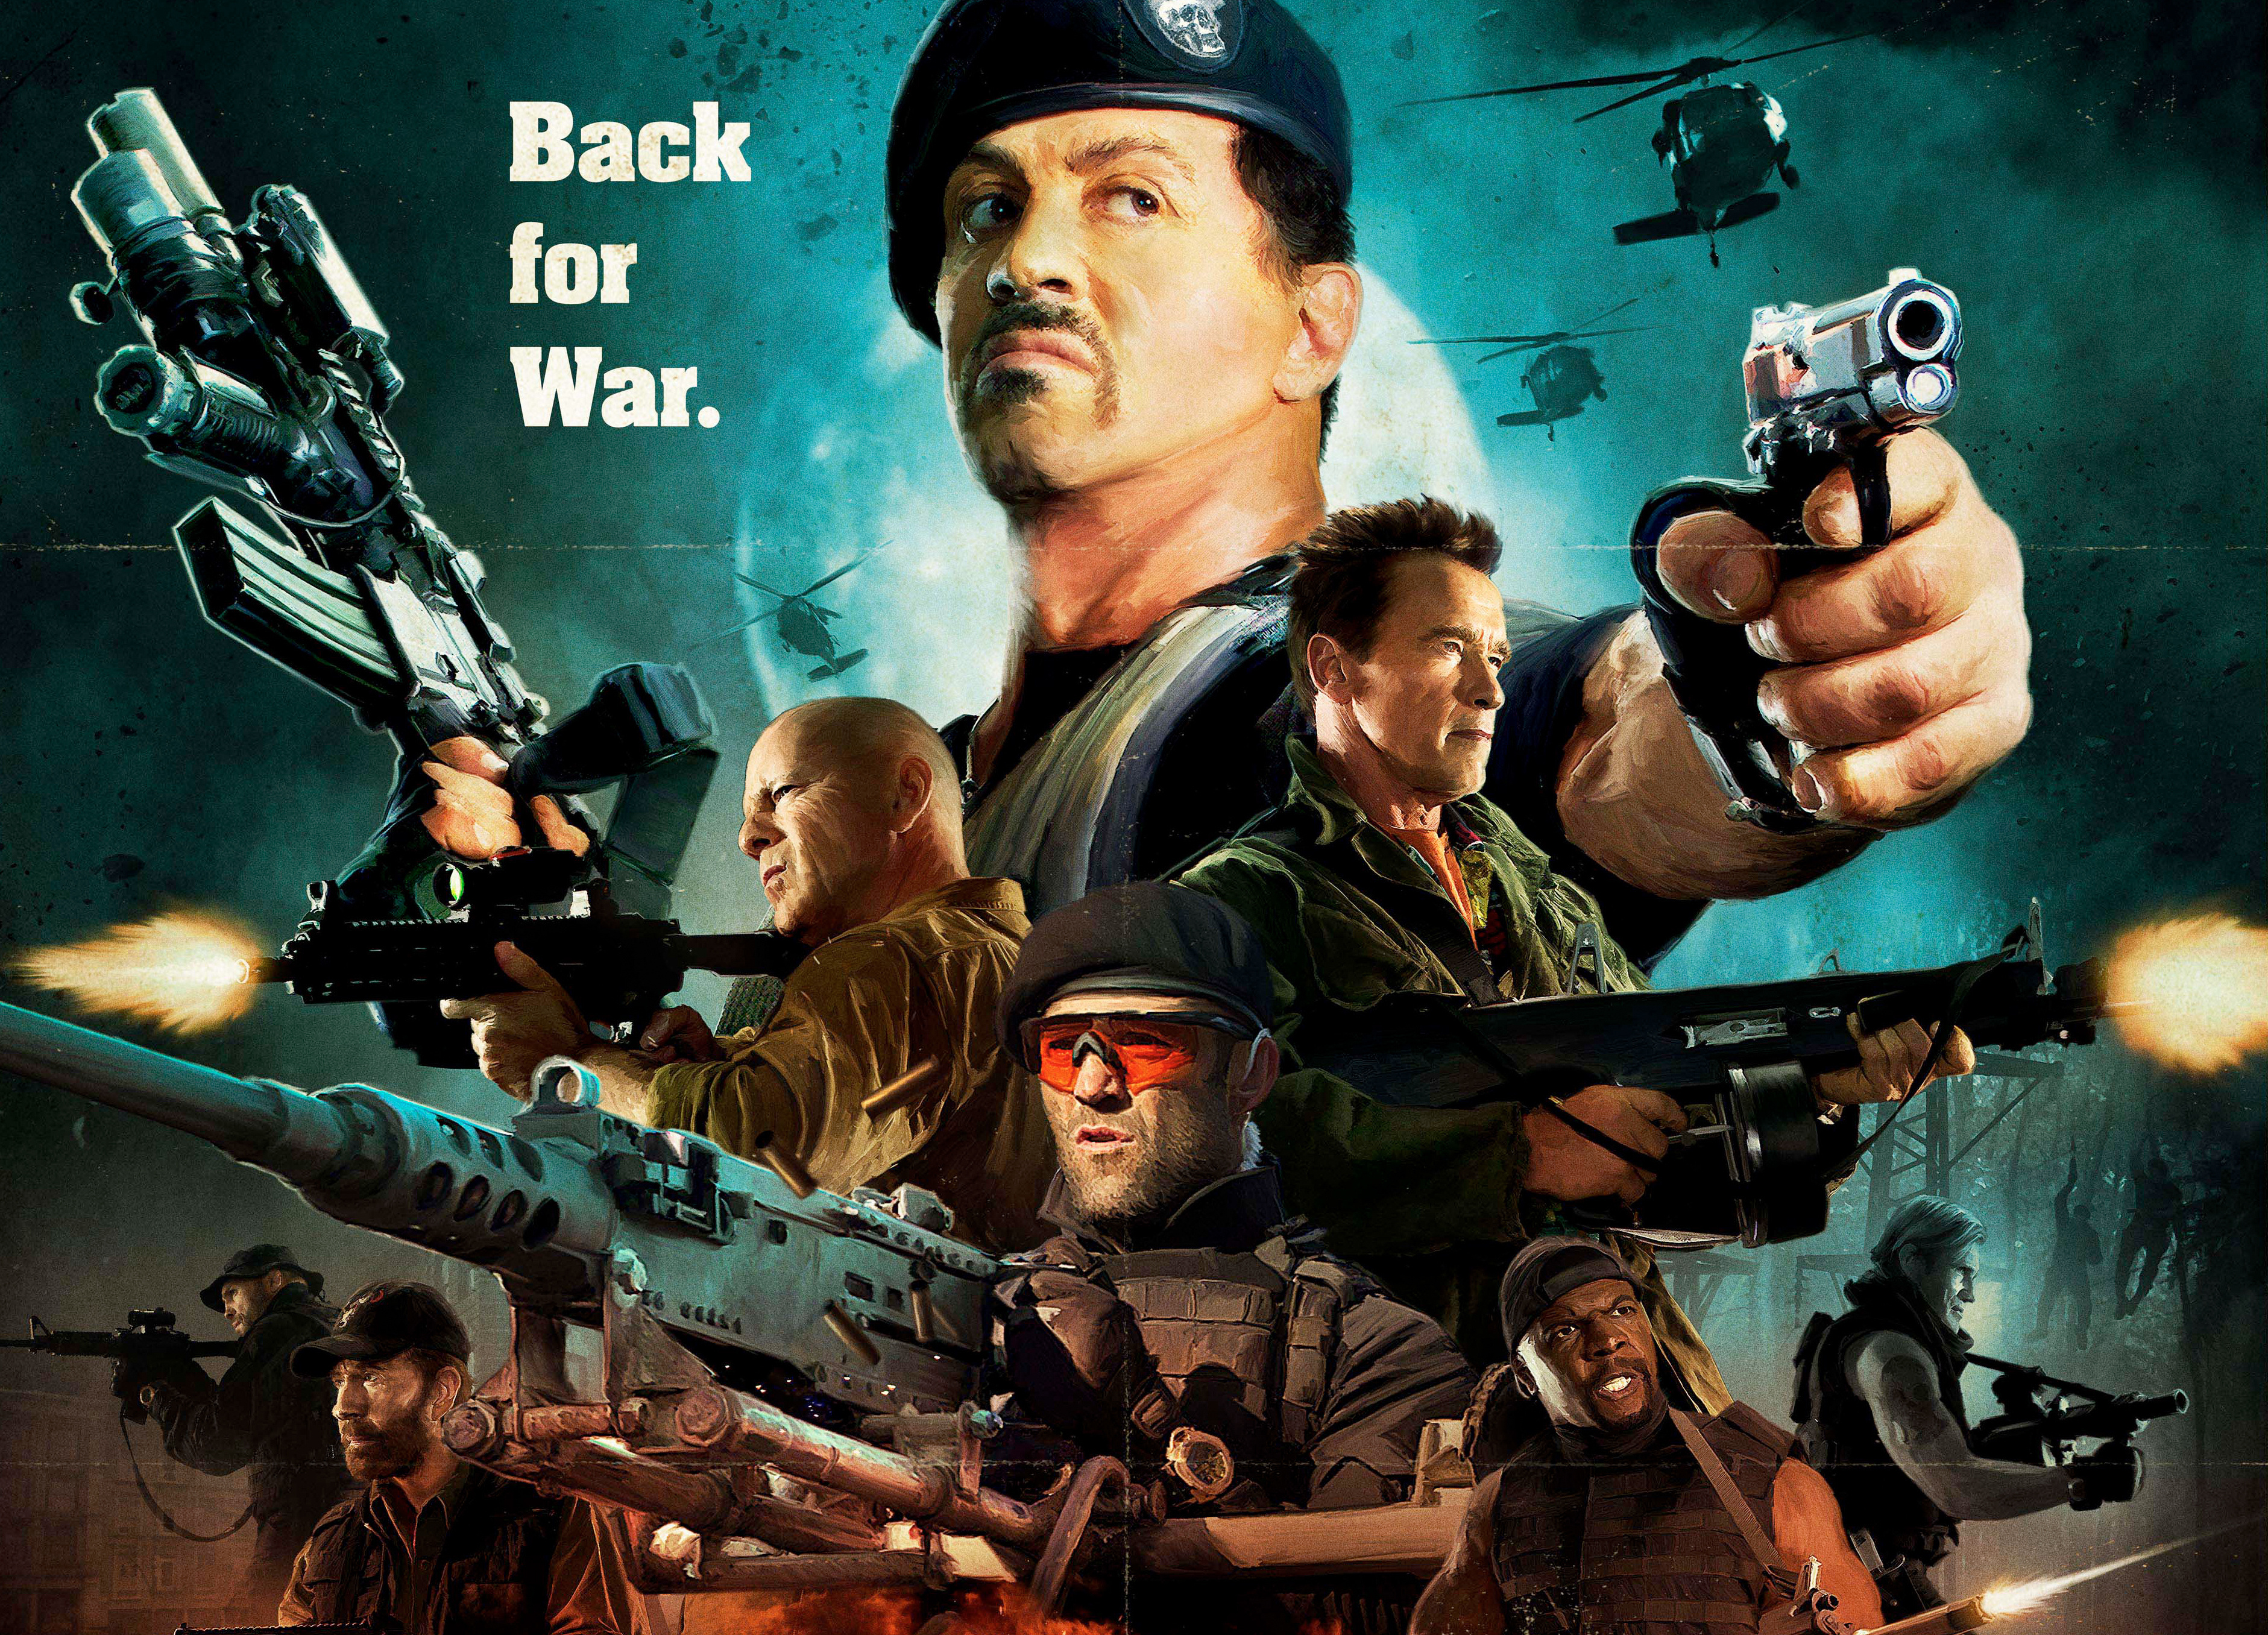 movie, the expendables 2, arnold schwarzenegger, barney ross, booker (the expendables), bruce willis, chuck norris, church (the expendables), dolph lundgren, gunnar jensen, hale caesar, jason statham, lee christmas, randy couture, sylvester stallone, terry crews, toll road, trench (the expendables), the expendables